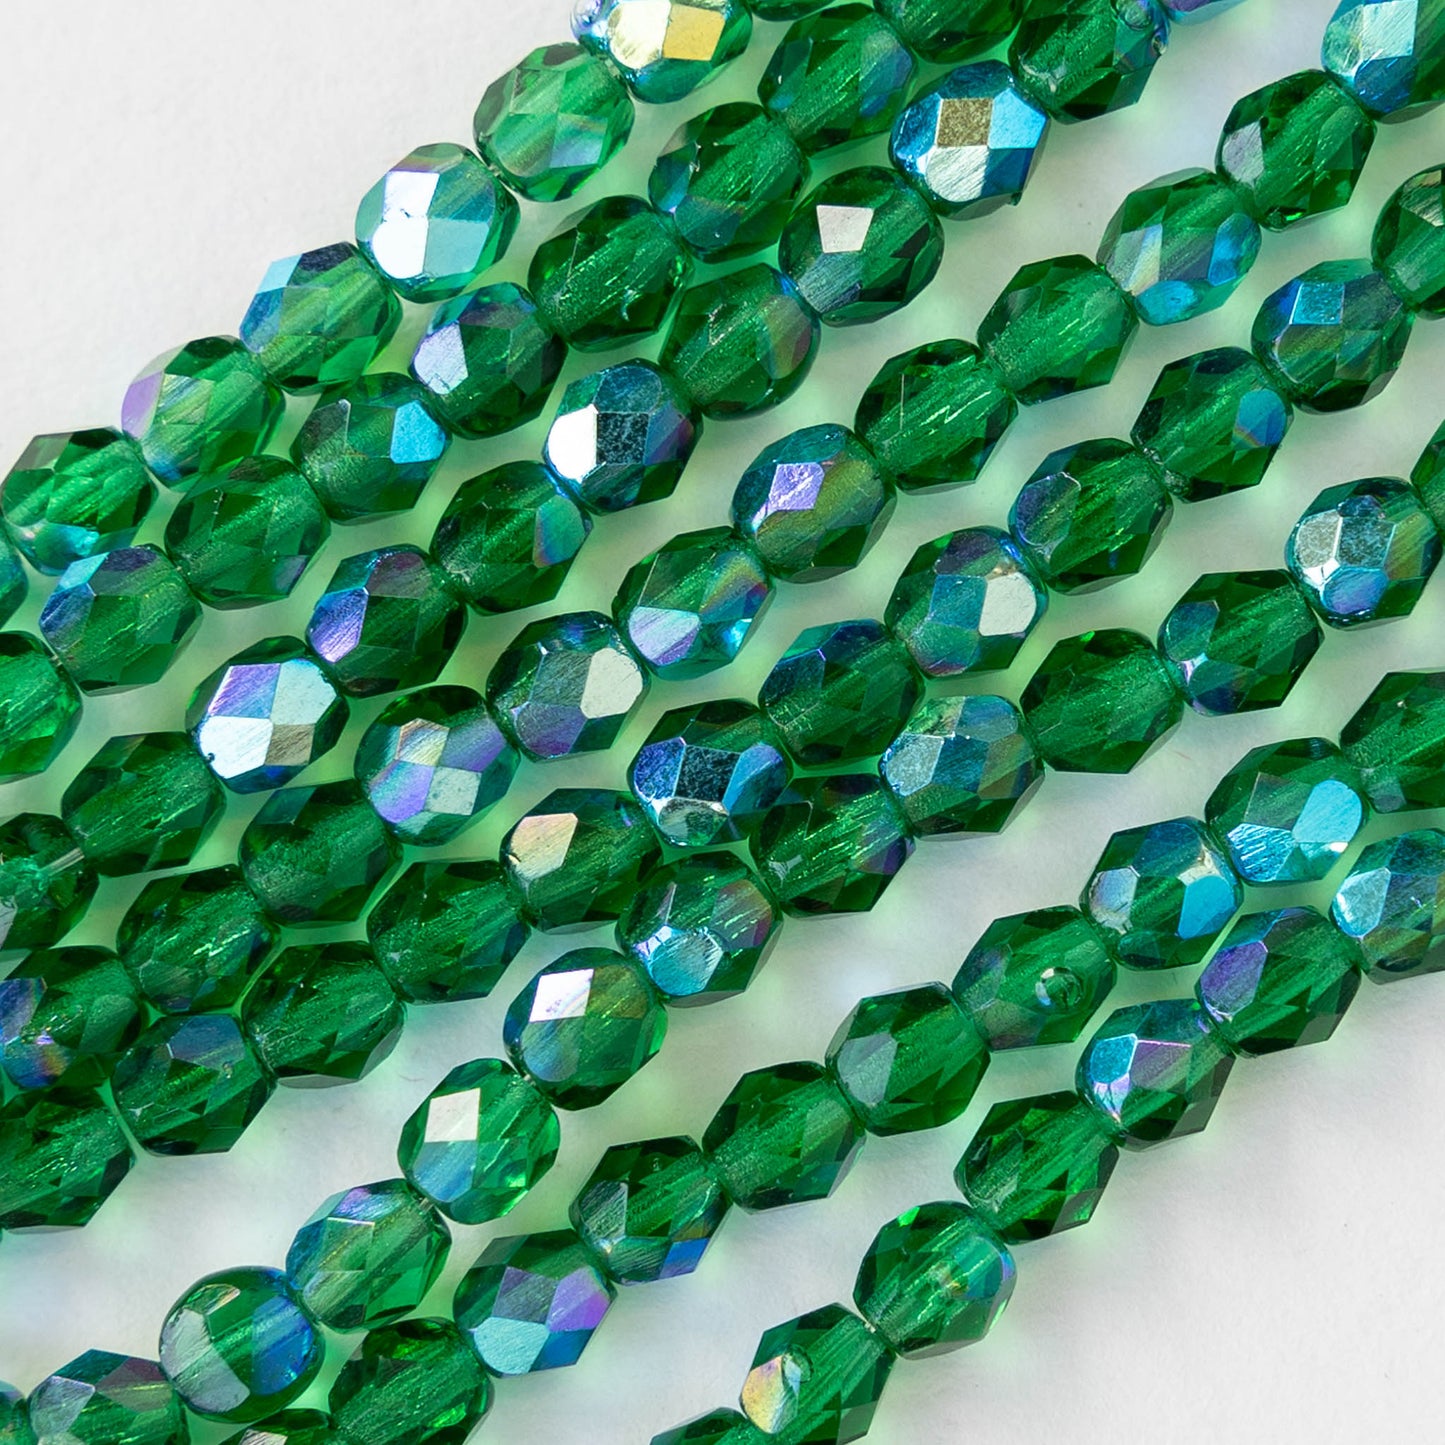 4mm Round Firepolished Beads - Emerald Green AB - 100 Beads